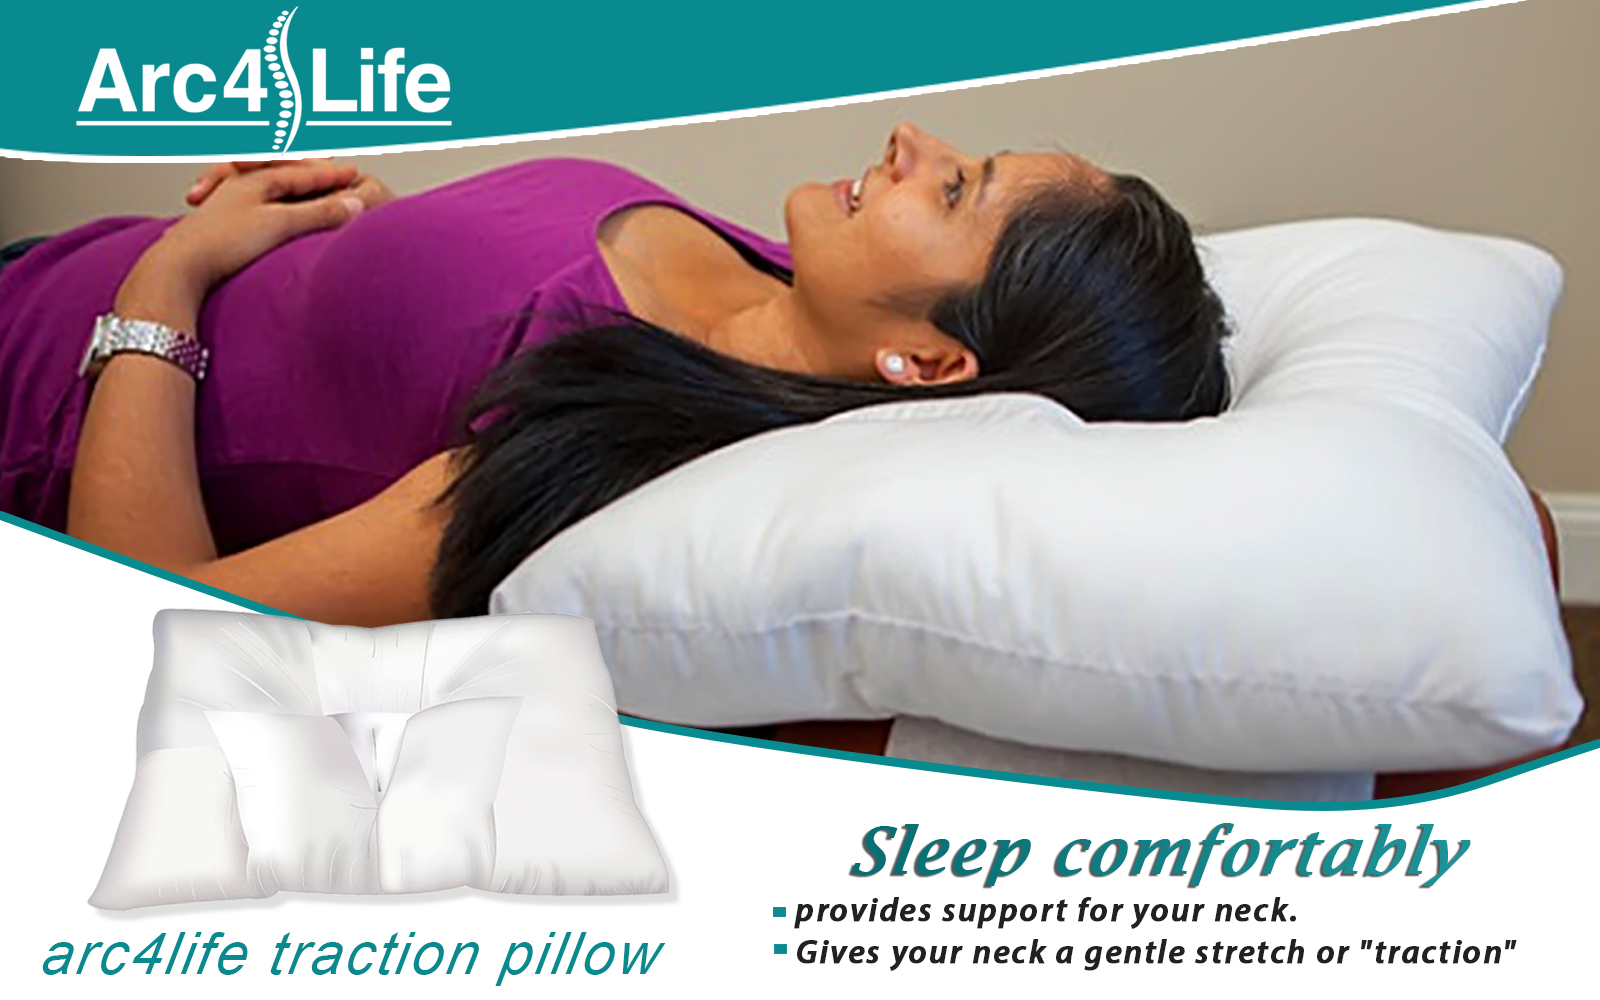 Arc4life Cervical Traction Neck Pillow Medium Size with Dust Cover Included - image 3 of 3